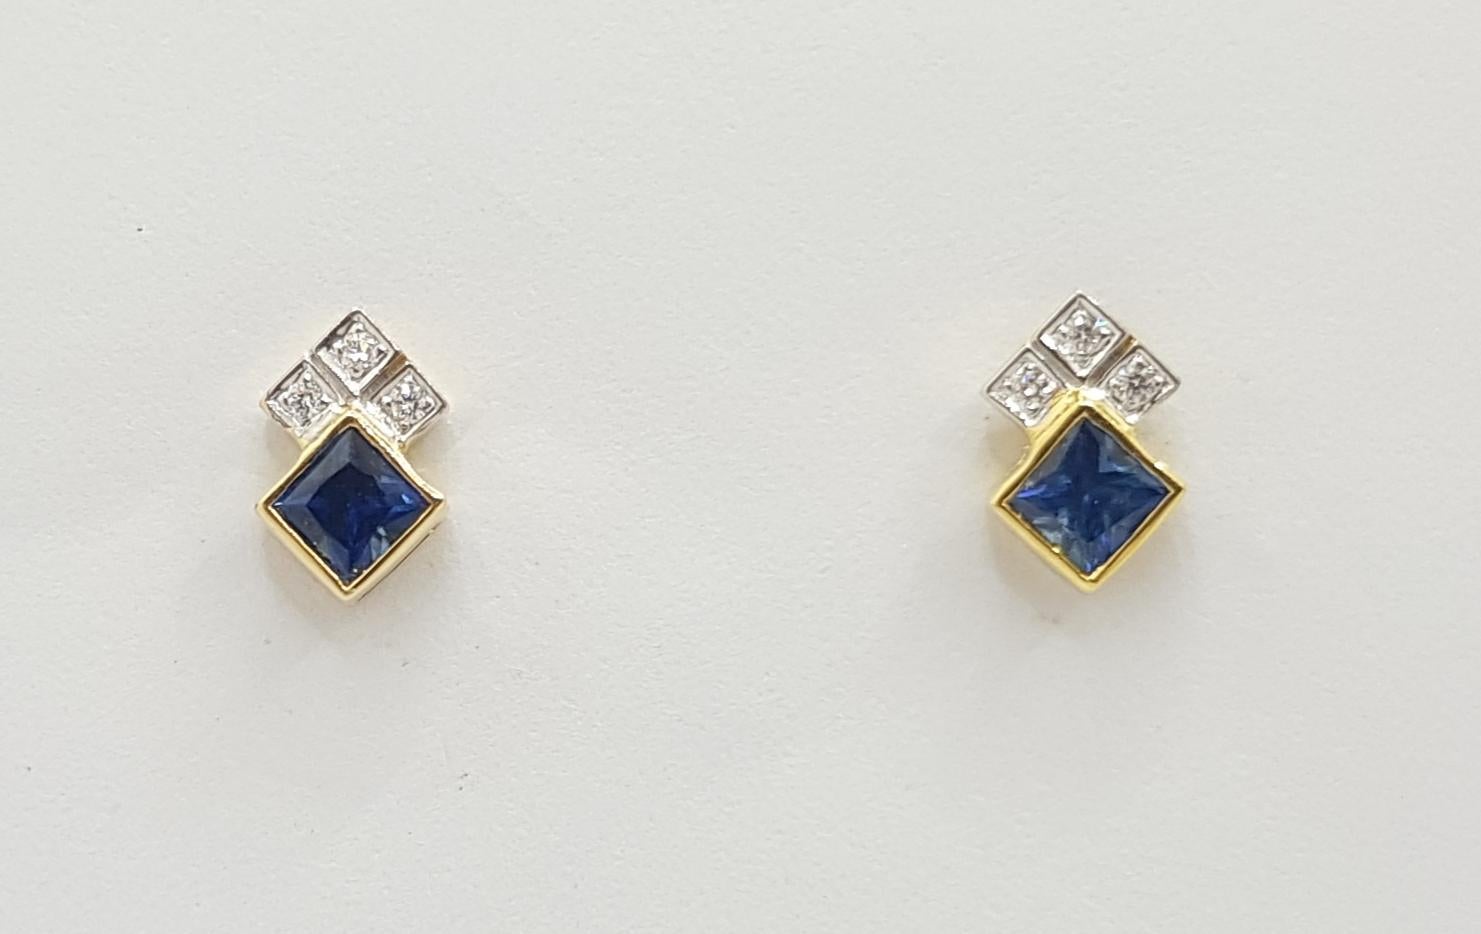 Contemporary Blue Sapphire 0.58 Carat with Diamond 0.05 Carat Earrings Set in 18 Karat Gold S For Sale